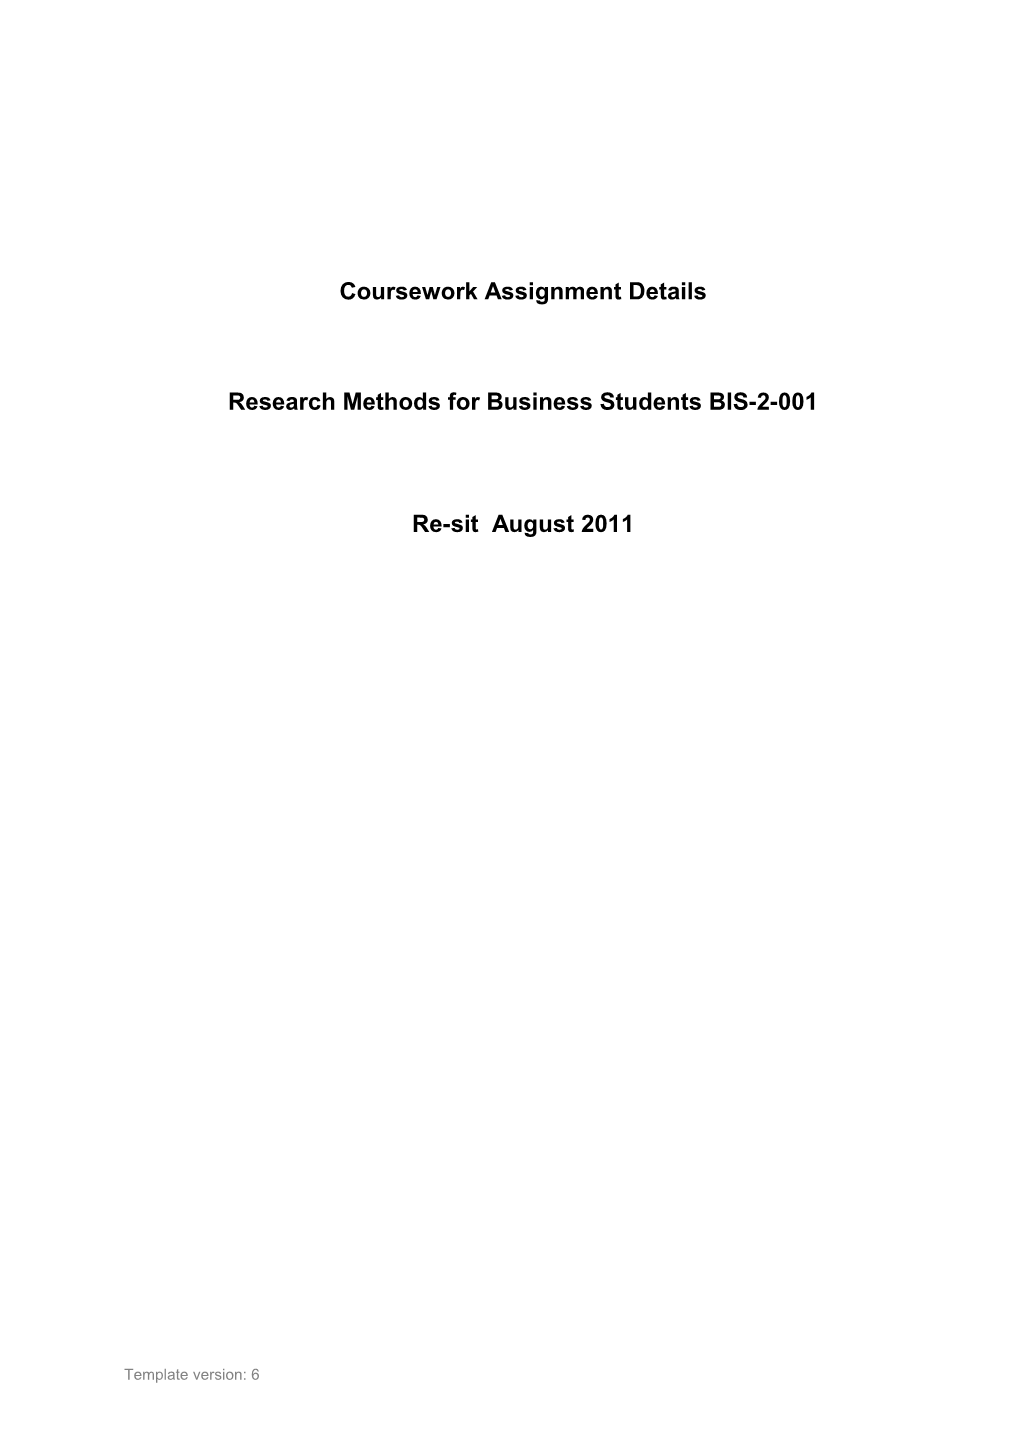 Research Methods for Business Students BIS-2-001